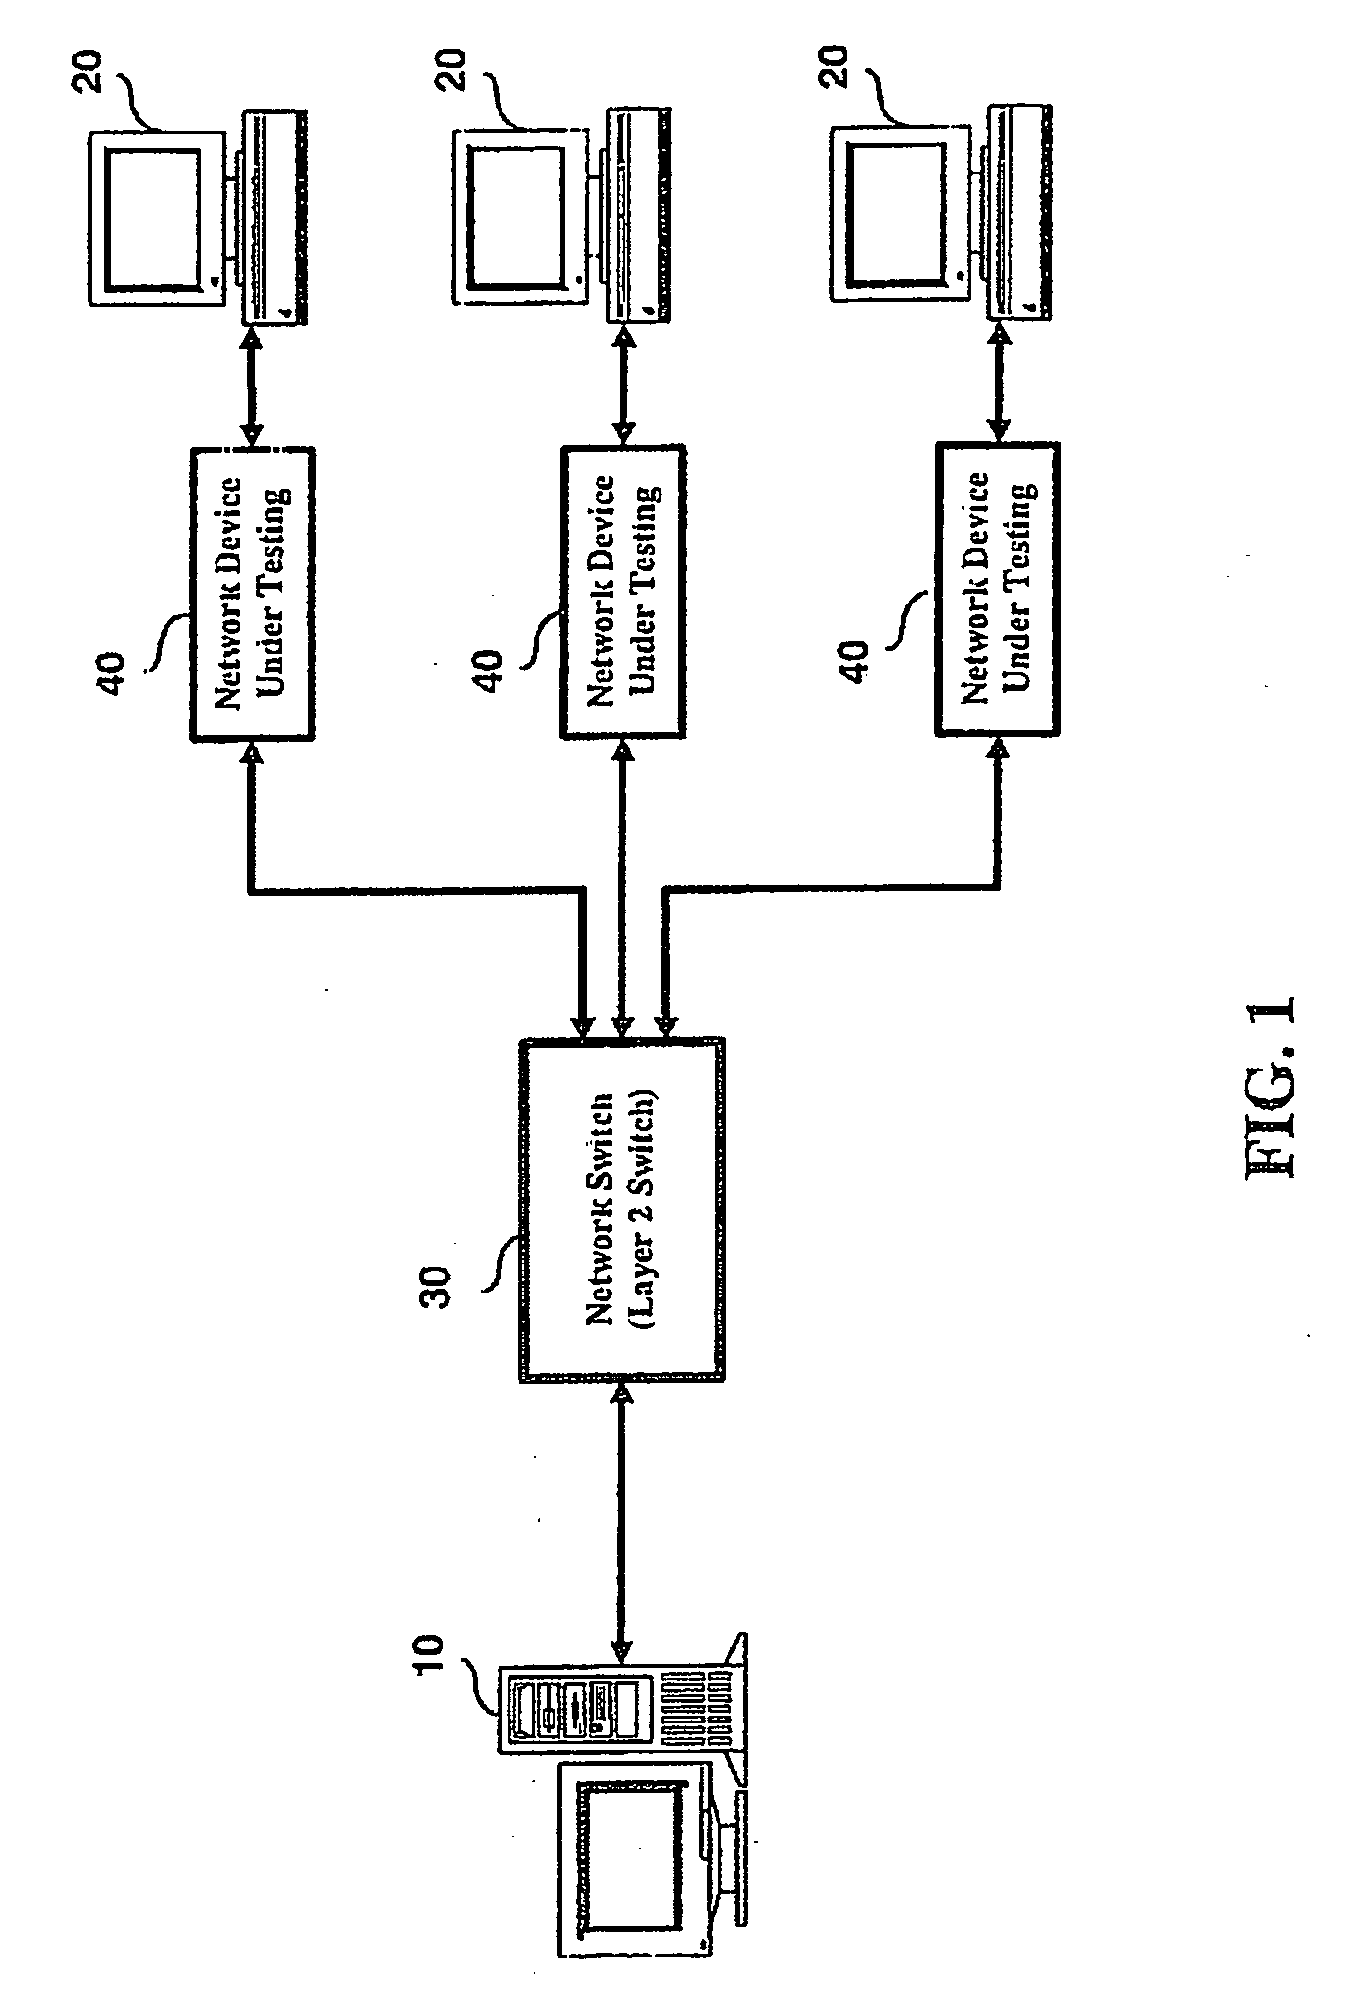 Network equipment testing method and system